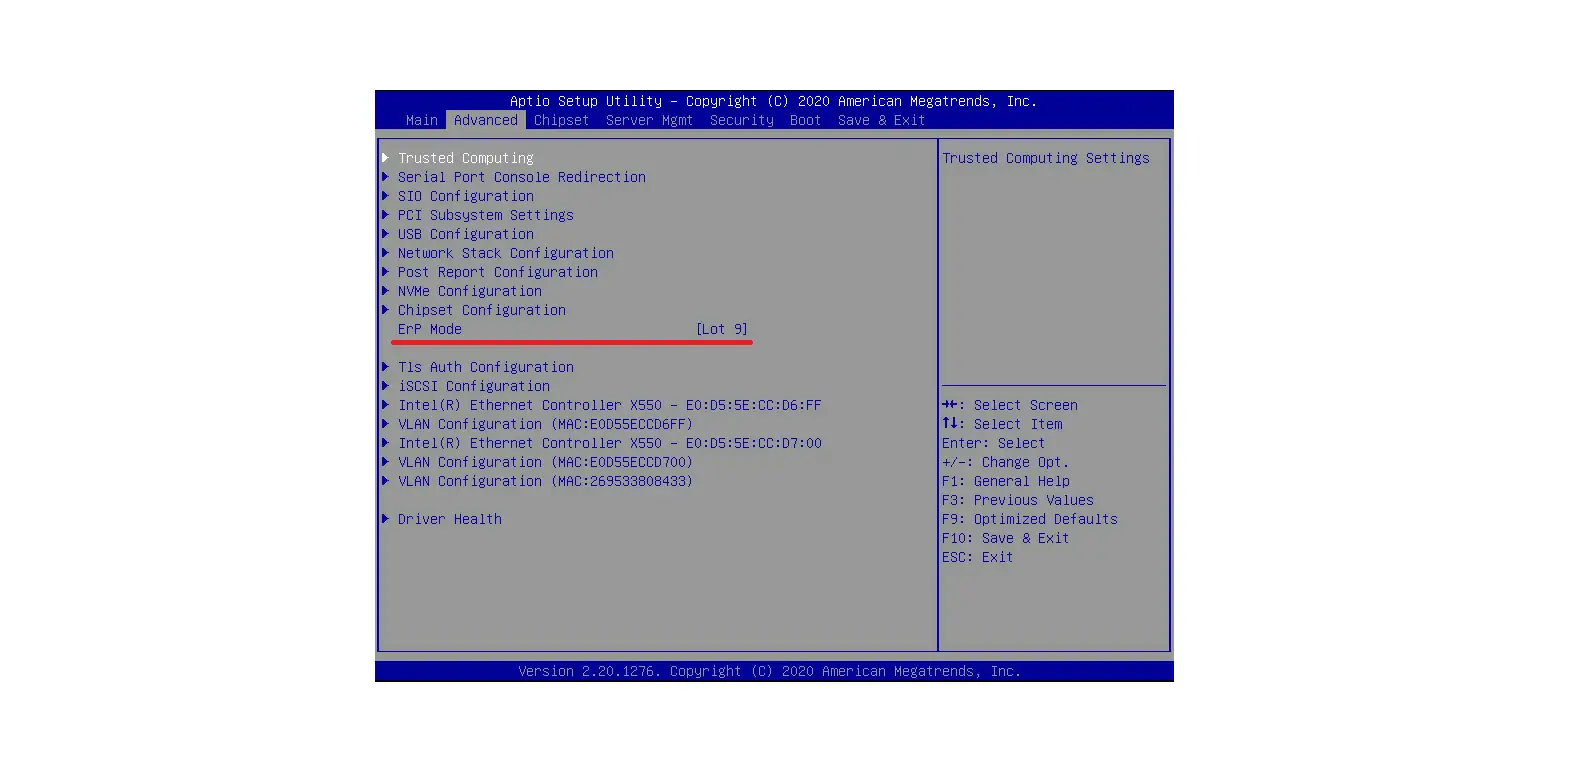 How to Configure ErP Lot 9 in BIOS